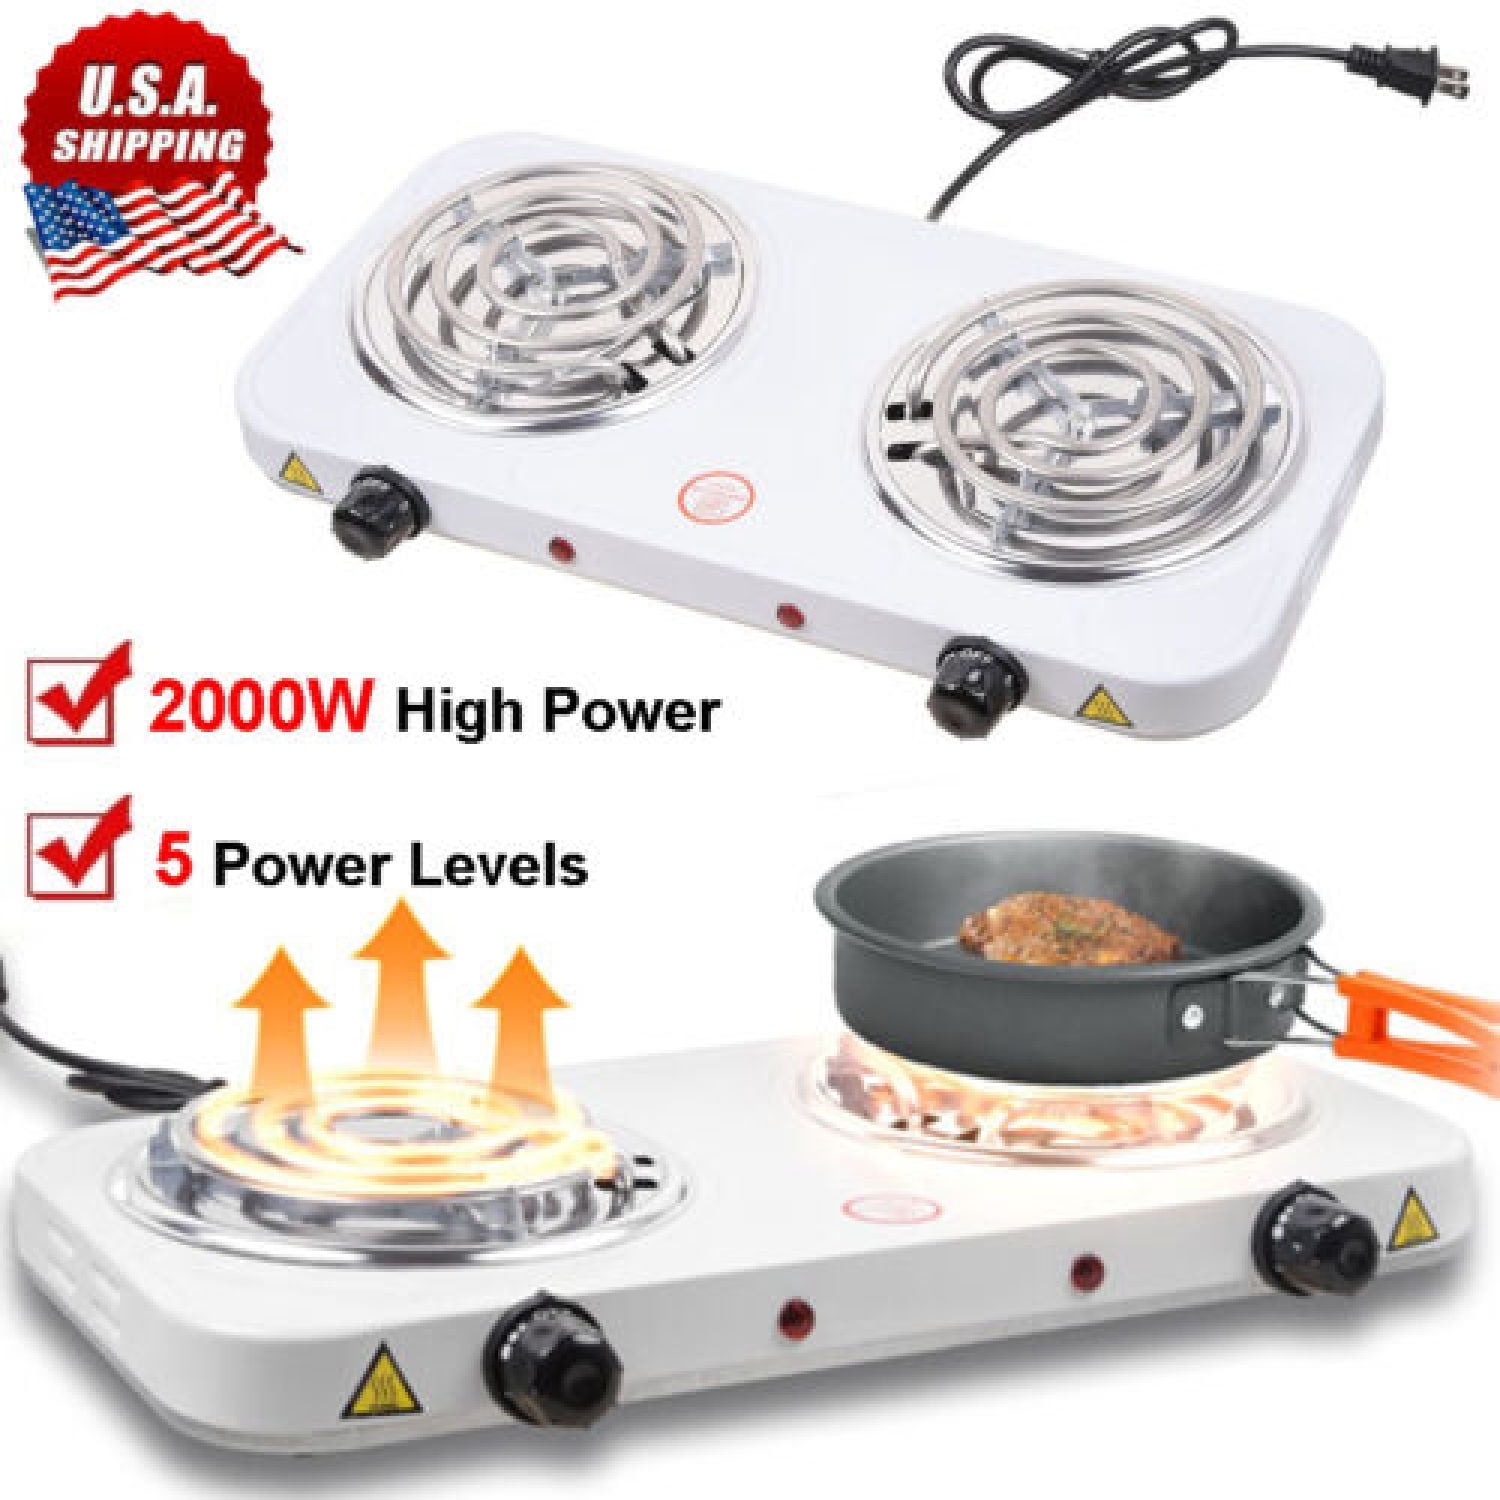 Electric Single&Double Stove-Hot Plate — SADIDI ELECTRONIC AND FURNITURE  OUTELETS